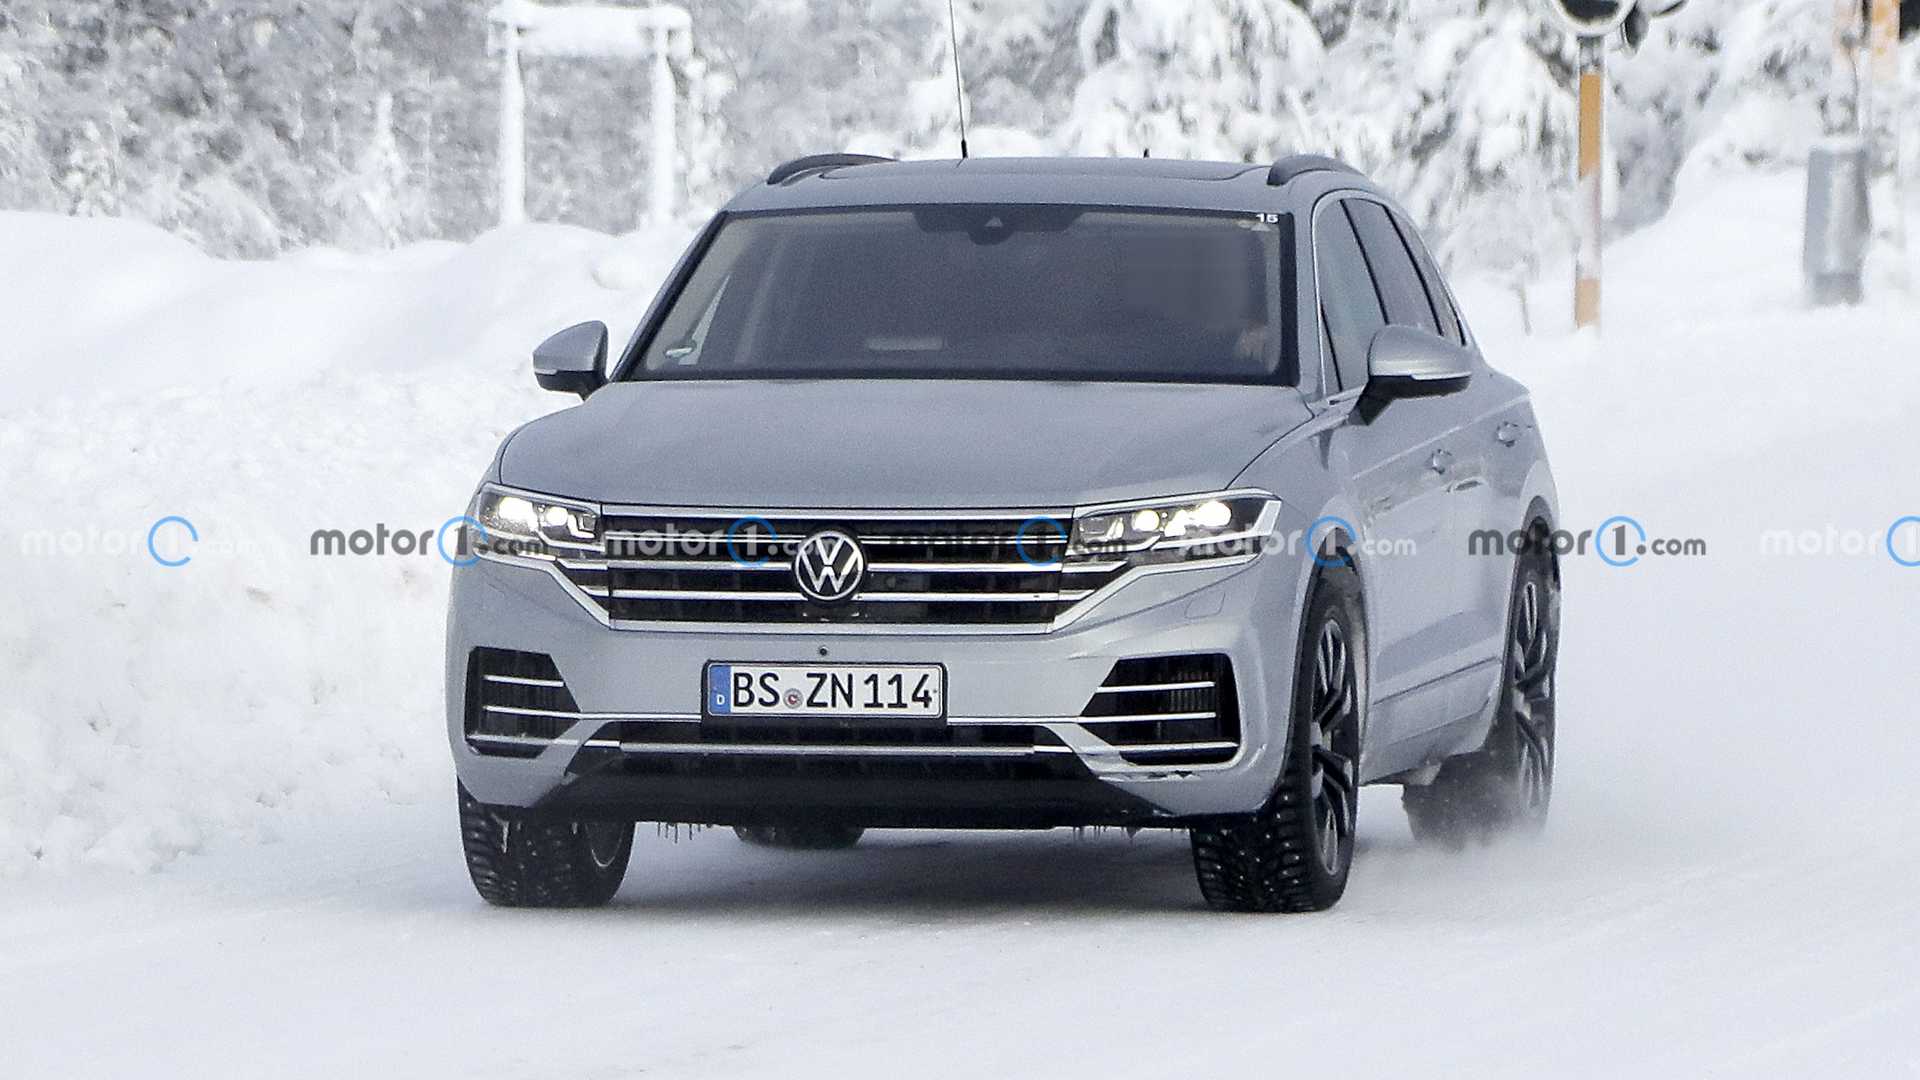 Volkswagen Touareg prototype hides its new style with stickers in new spy images